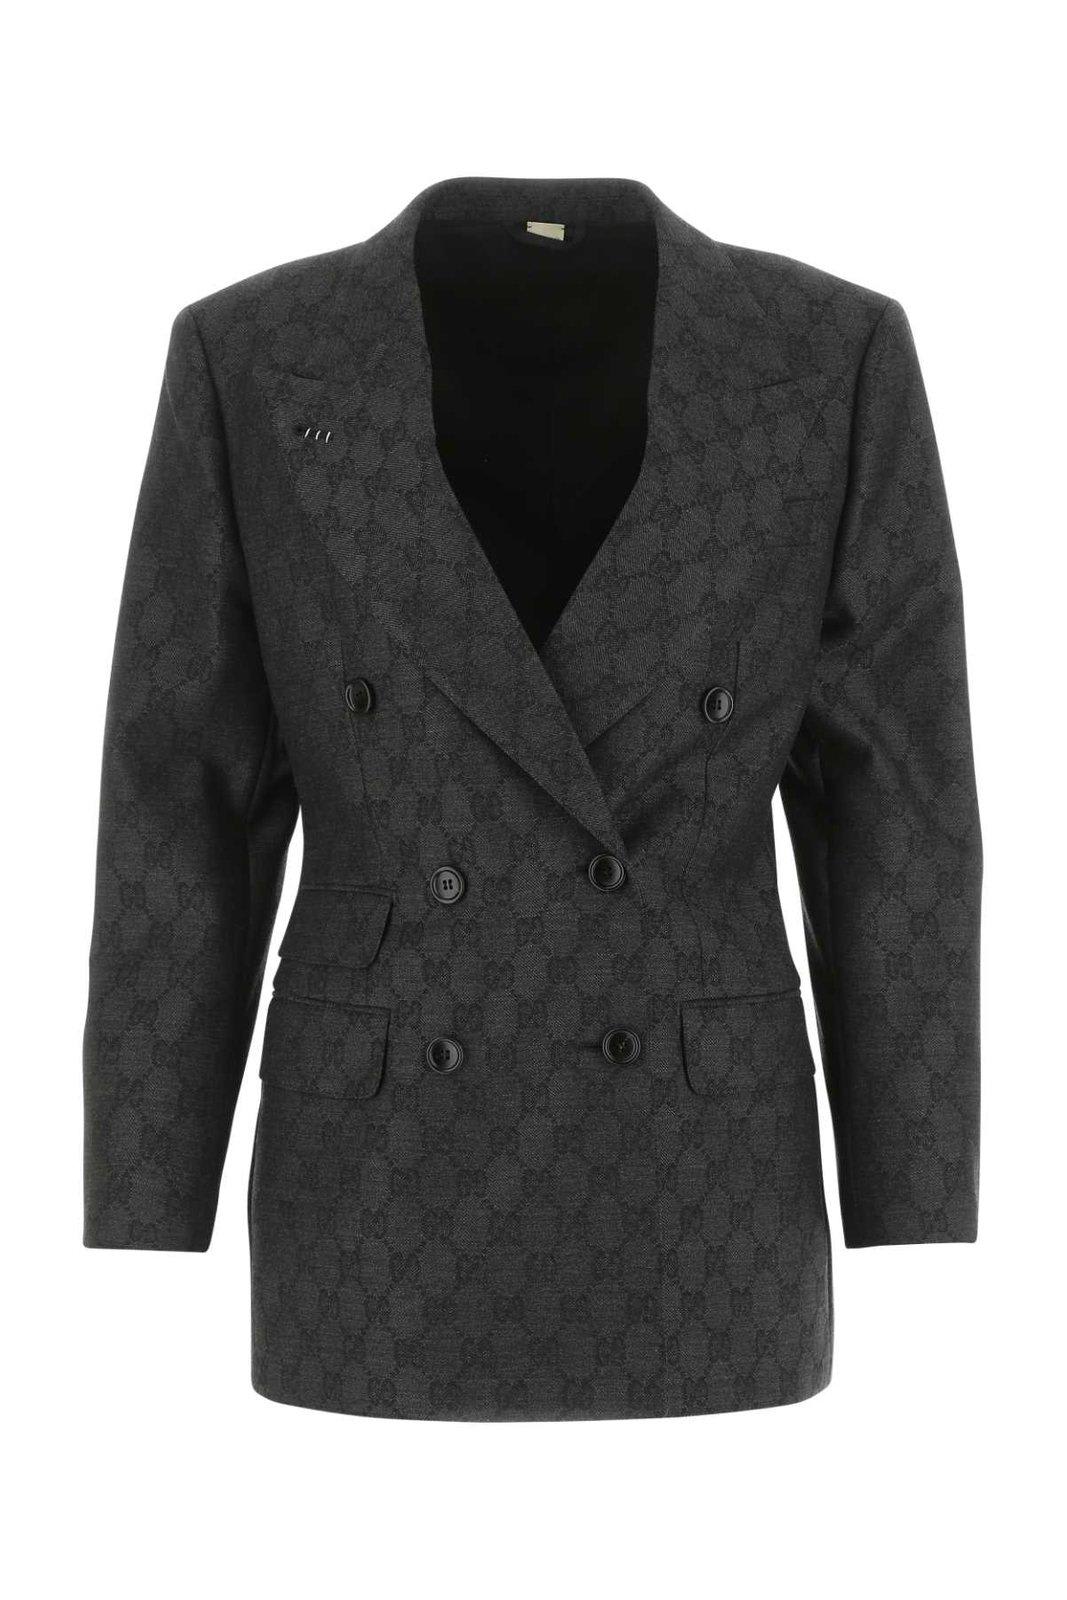 Shop Gucci Gg Jacquard Double-breasted Jacket